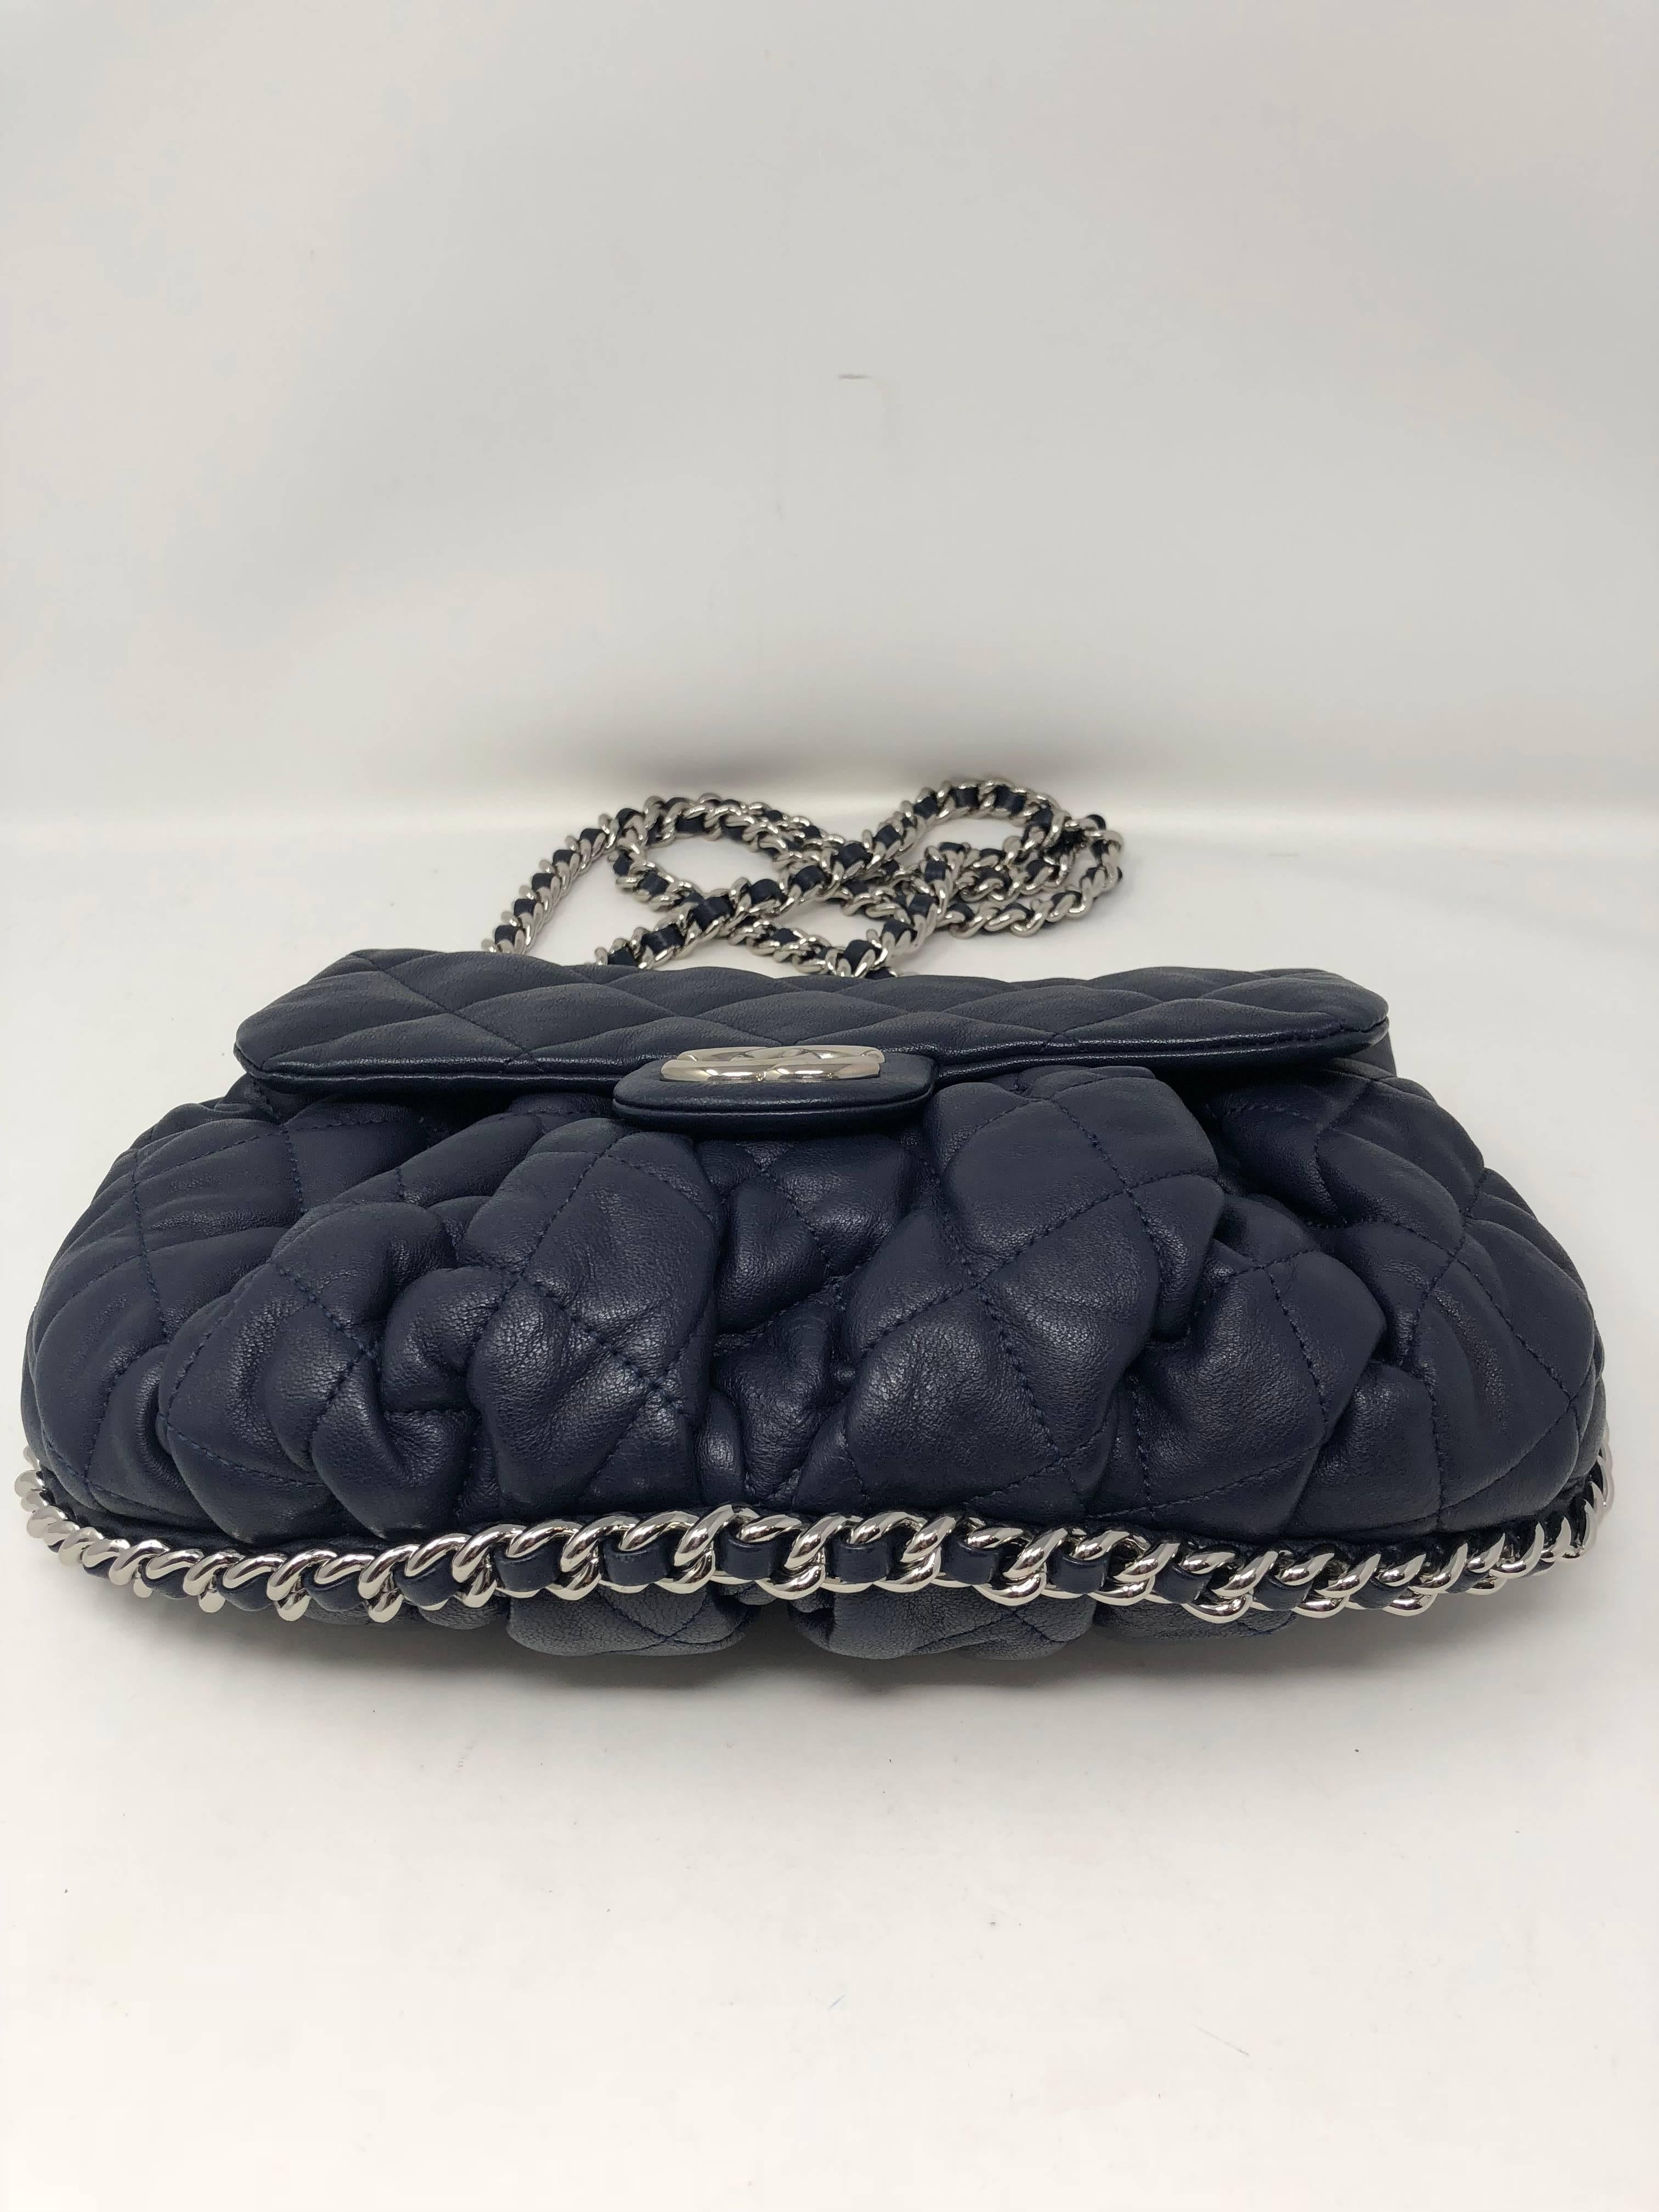 Chanel Navy Chain Around Crossbody bag in navy blue leather. This Chanel looks like is was never used. Mint like new condition. From the Cruise collection released in 2011. Silver hardware is shiny and interior of bag is clean with no wear. Comes